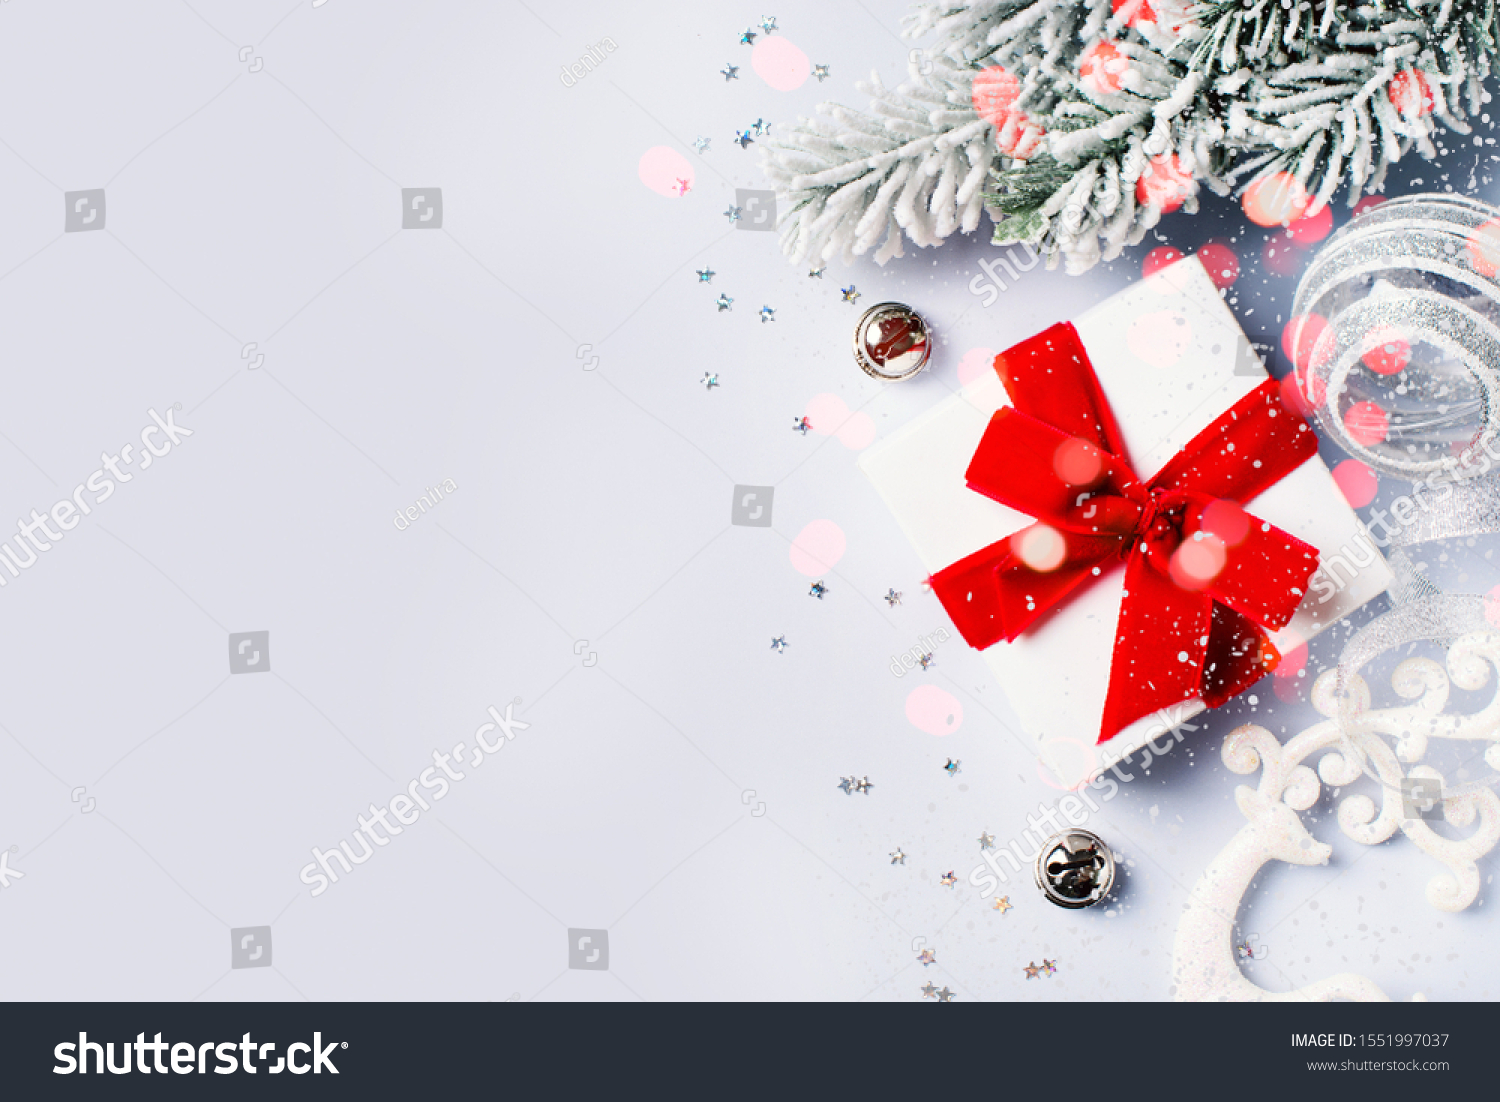 Christmas gift box flat lay on white background with decoration. Happy new year background and backdrop, copy space, top view #1551997037